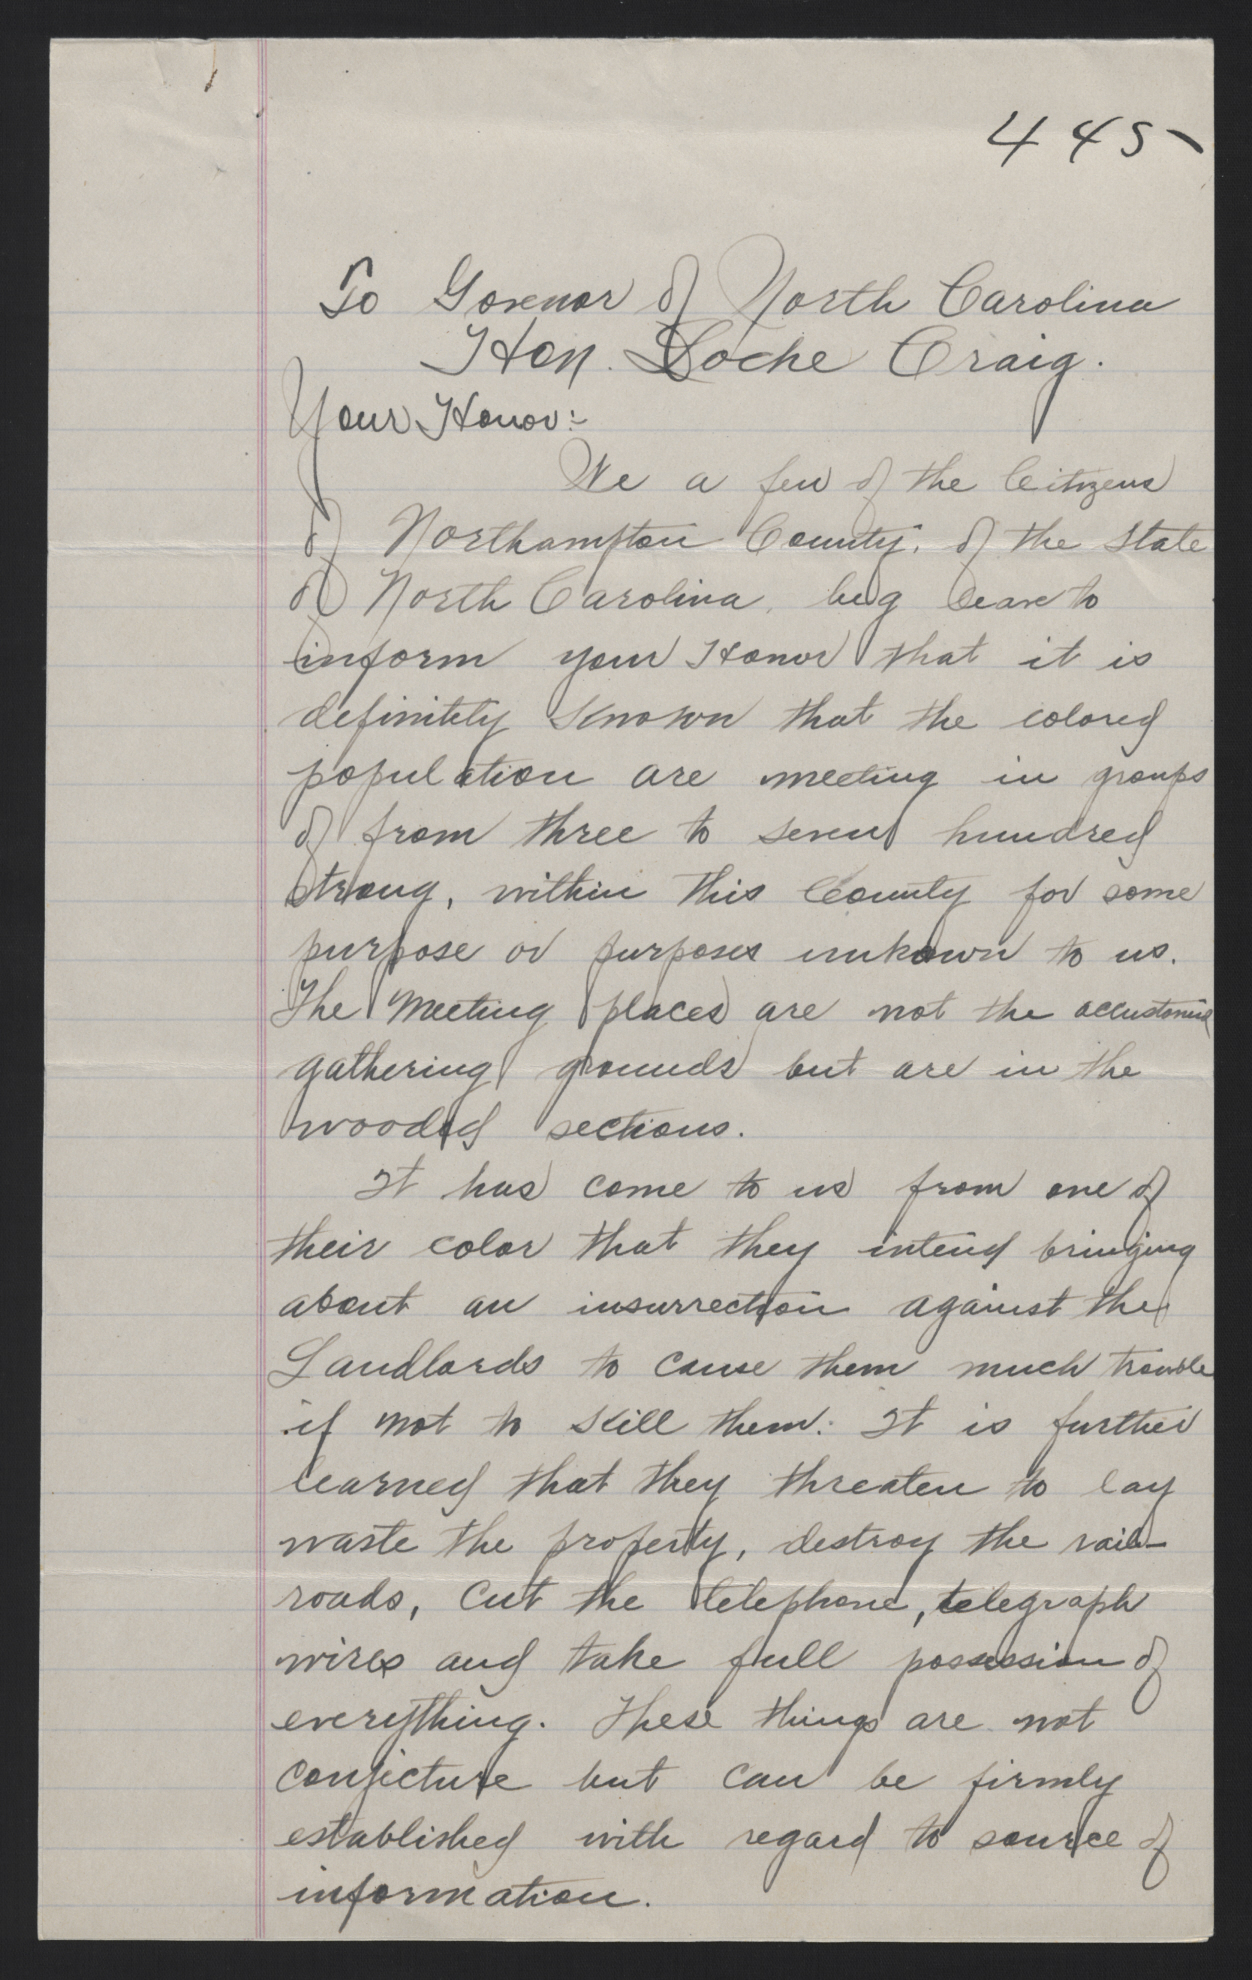 Letter from Jacob A. Rudisill, William T. Bridgers, and Charles J. Garriss to Locke Craig, circa September 1913, page 1